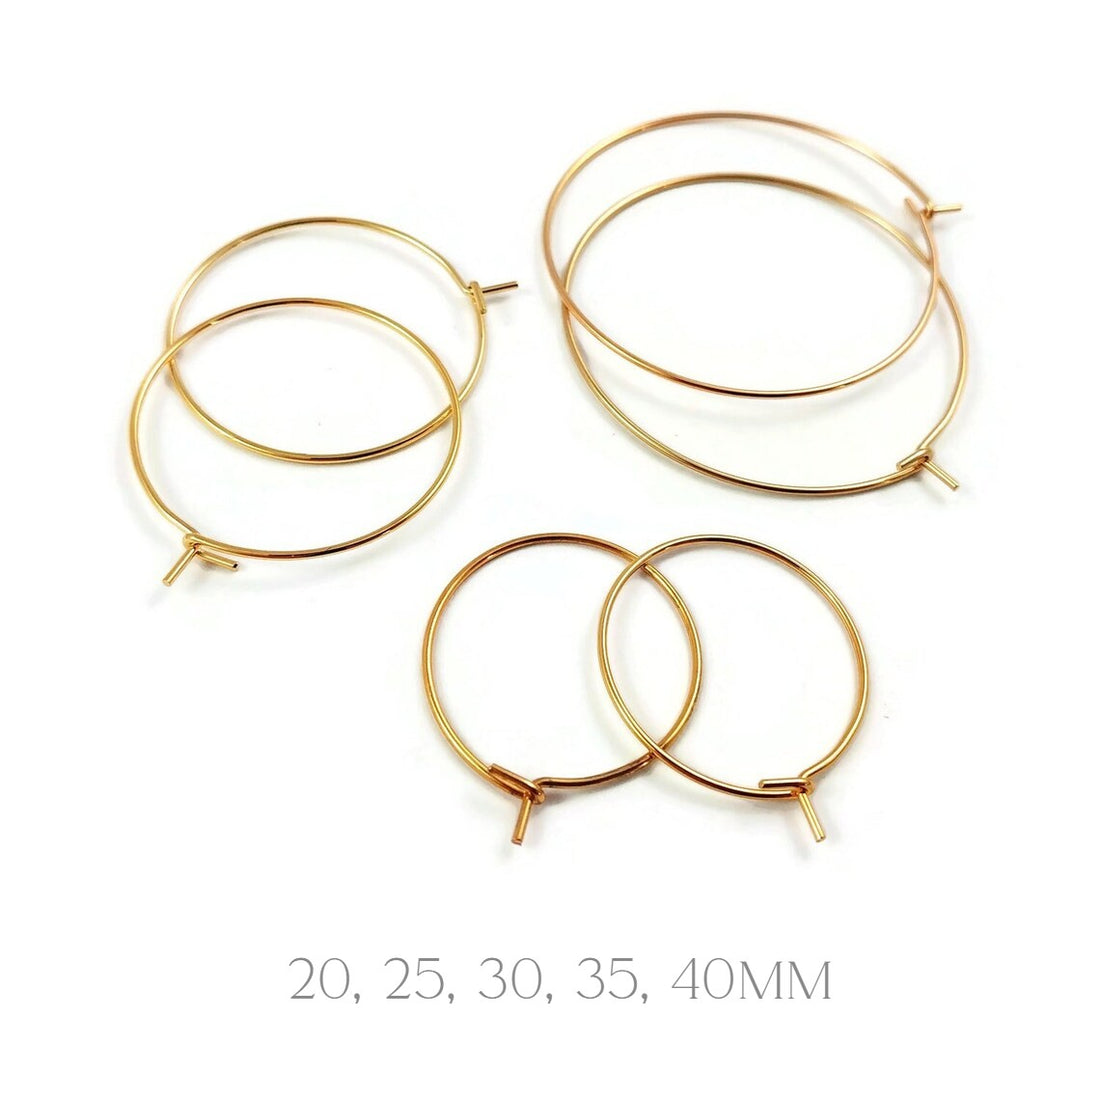 20 mm Stainless Steel Fish Hook Earring Wires with Ball 20GA, Metal Ear  wires - Rose Gold - 10 pc (5 pairs)